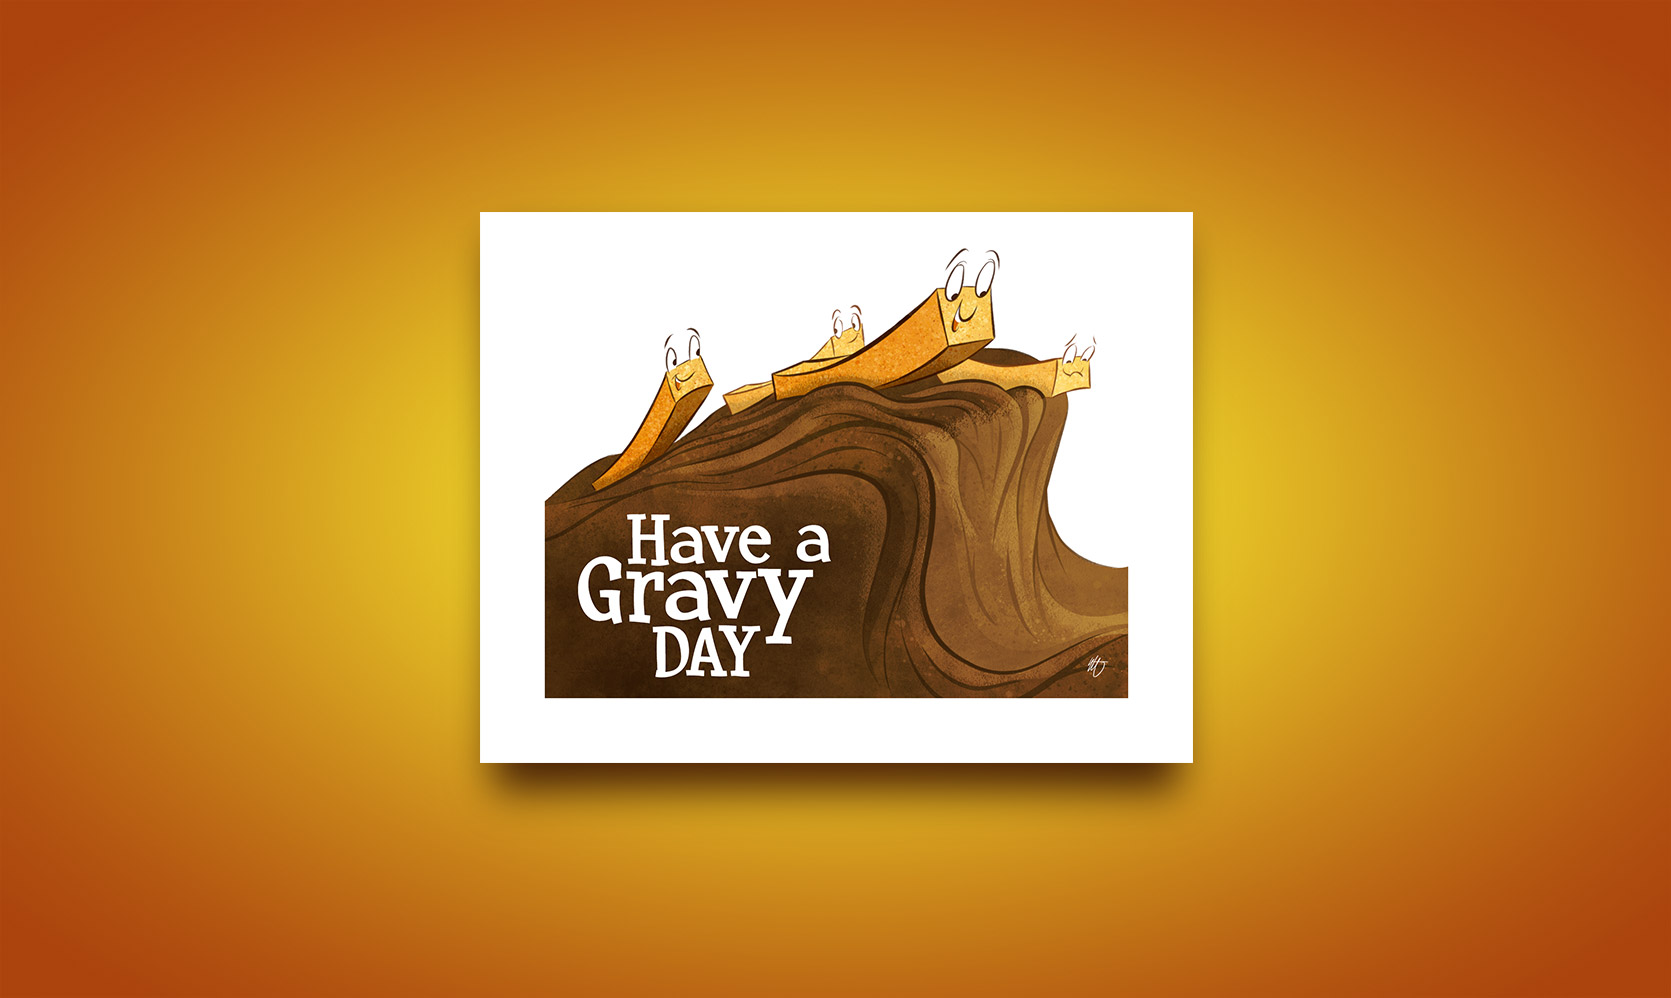 Have a gravy day